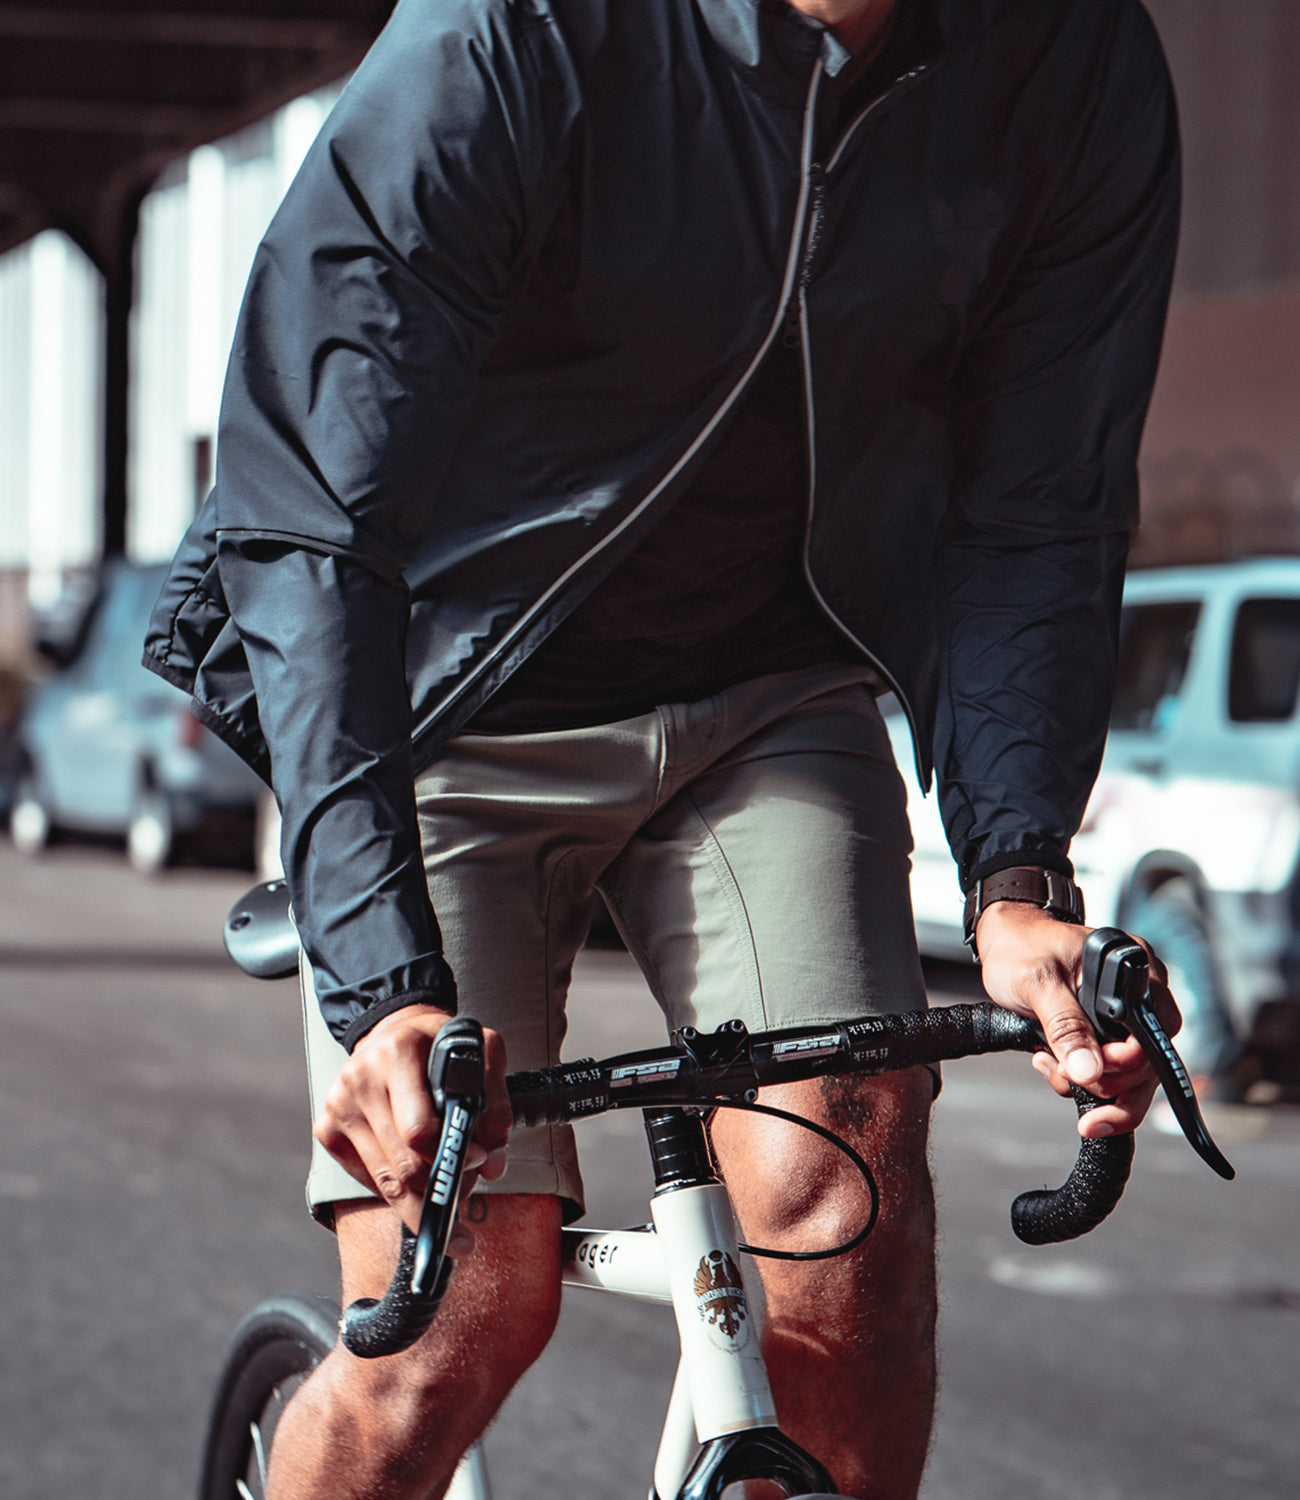 Wind Cobra Packable Jacket worn by a person on a bike mobile size image